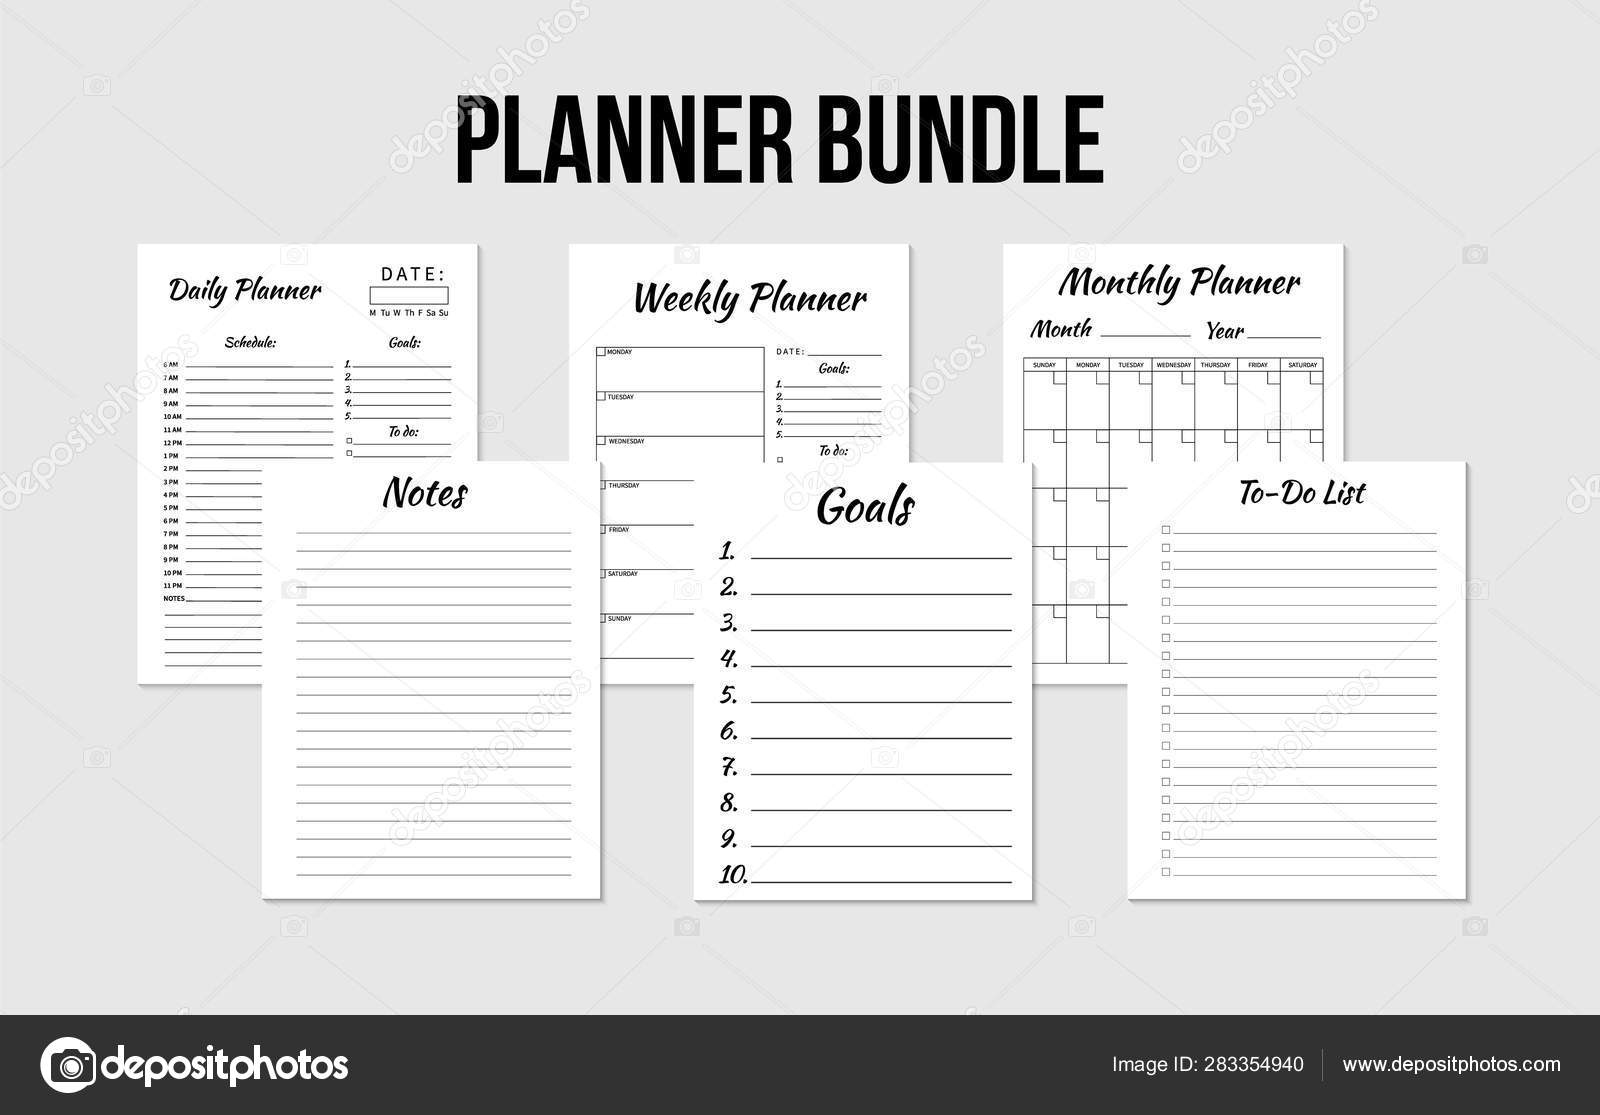 Daily planner. Digital notebook To do list download Digital business planner Monthly planner Weekly planer printable pages